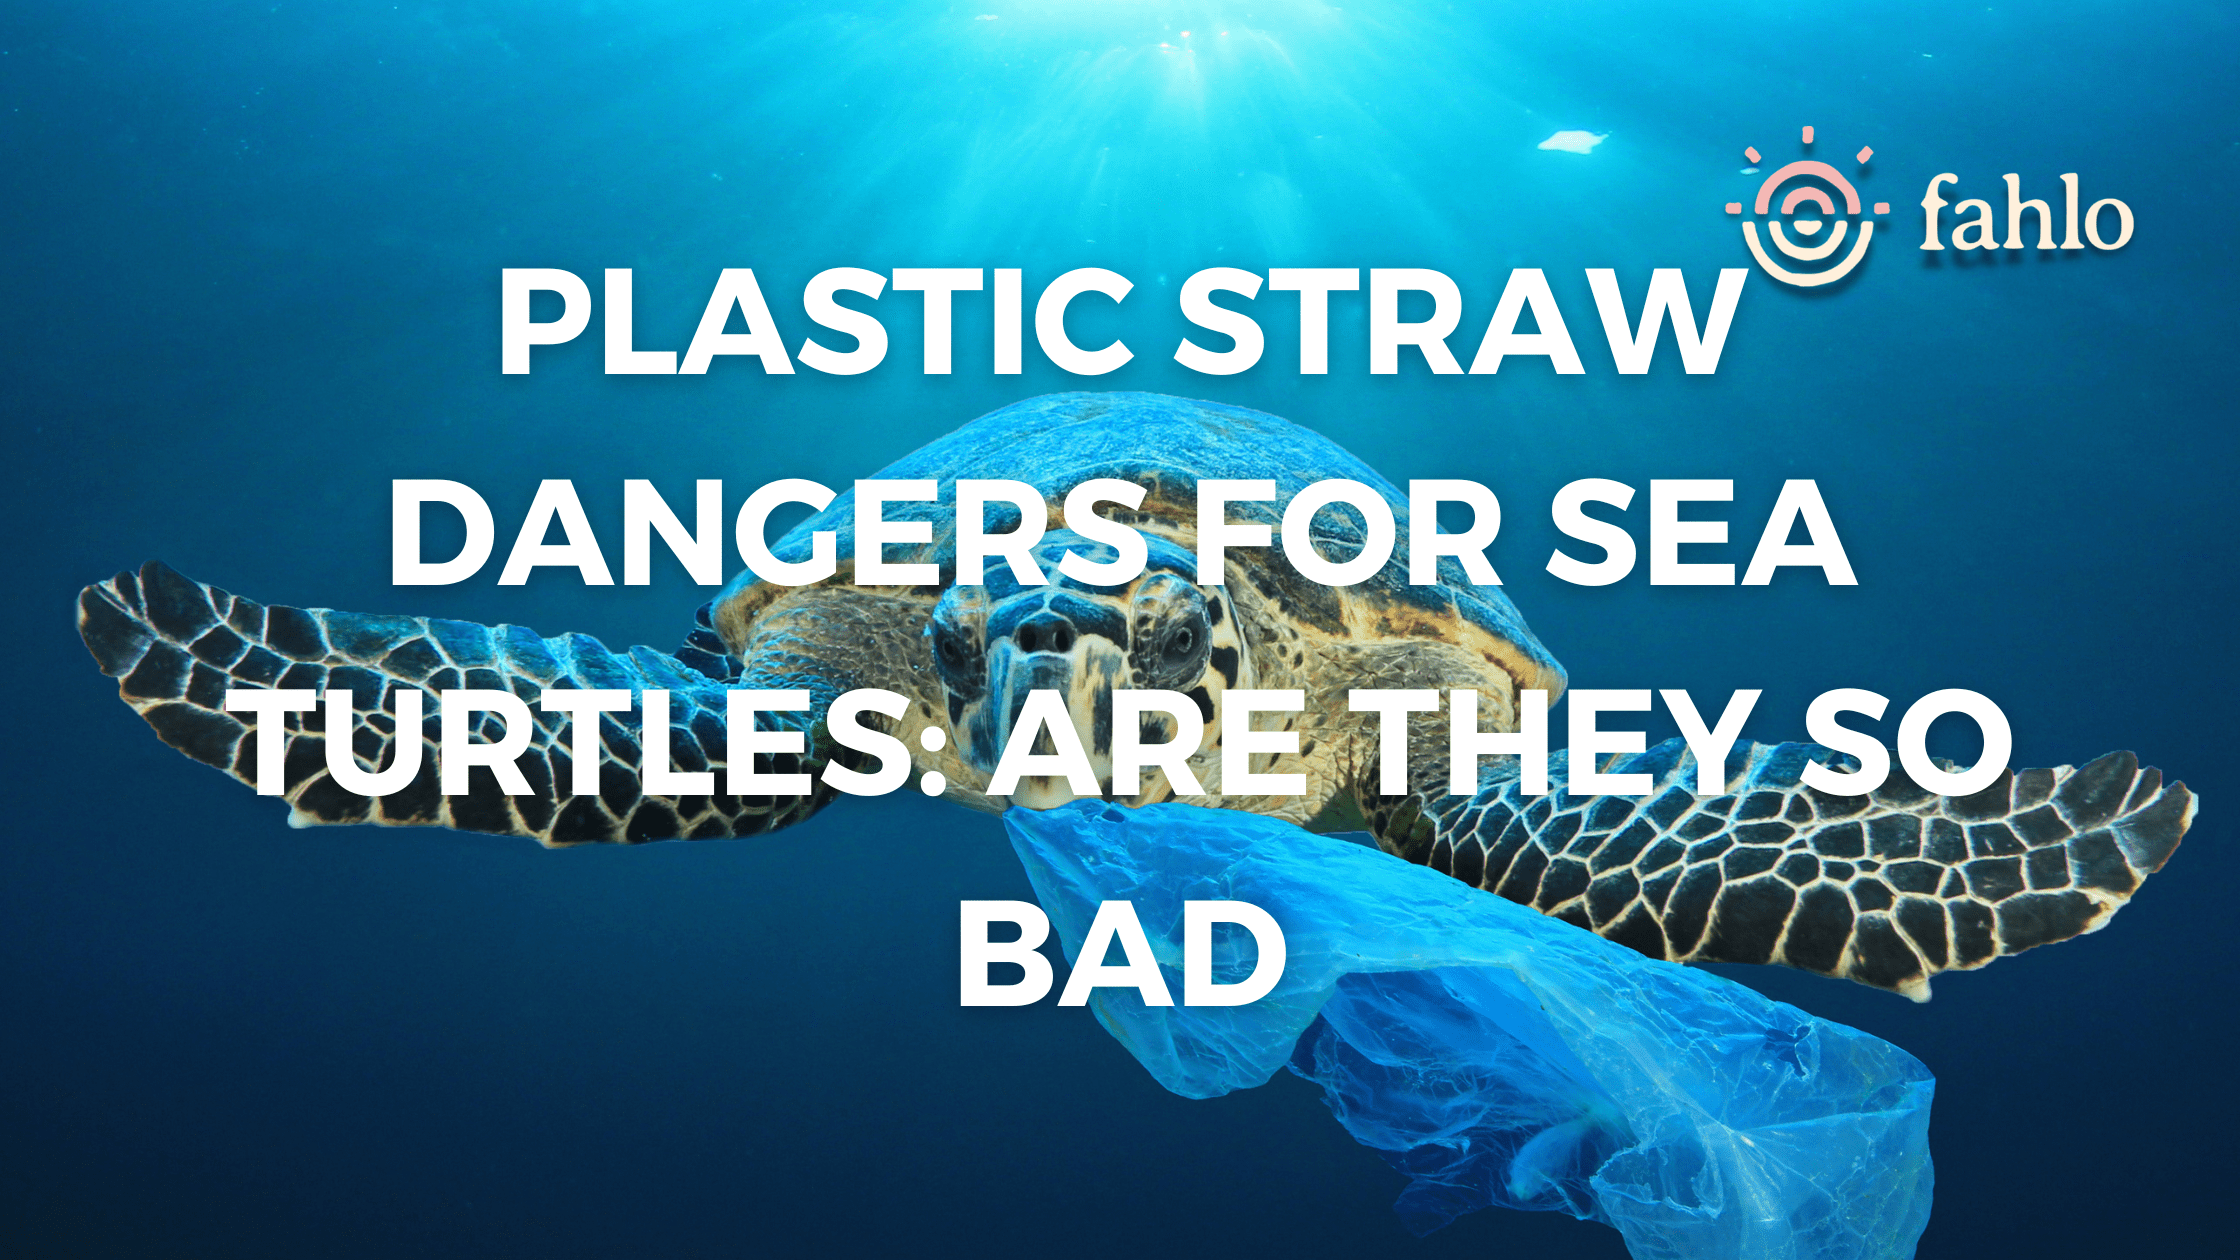 http://myfahlo.com/cdn/shop/articles/Plastic_Straw_Dangers_For_Sea_Turtles-_Are_They_So_Bad_bfcee8f4-b301-4fd4-9904-69bb76e34977.png?v=1687367382